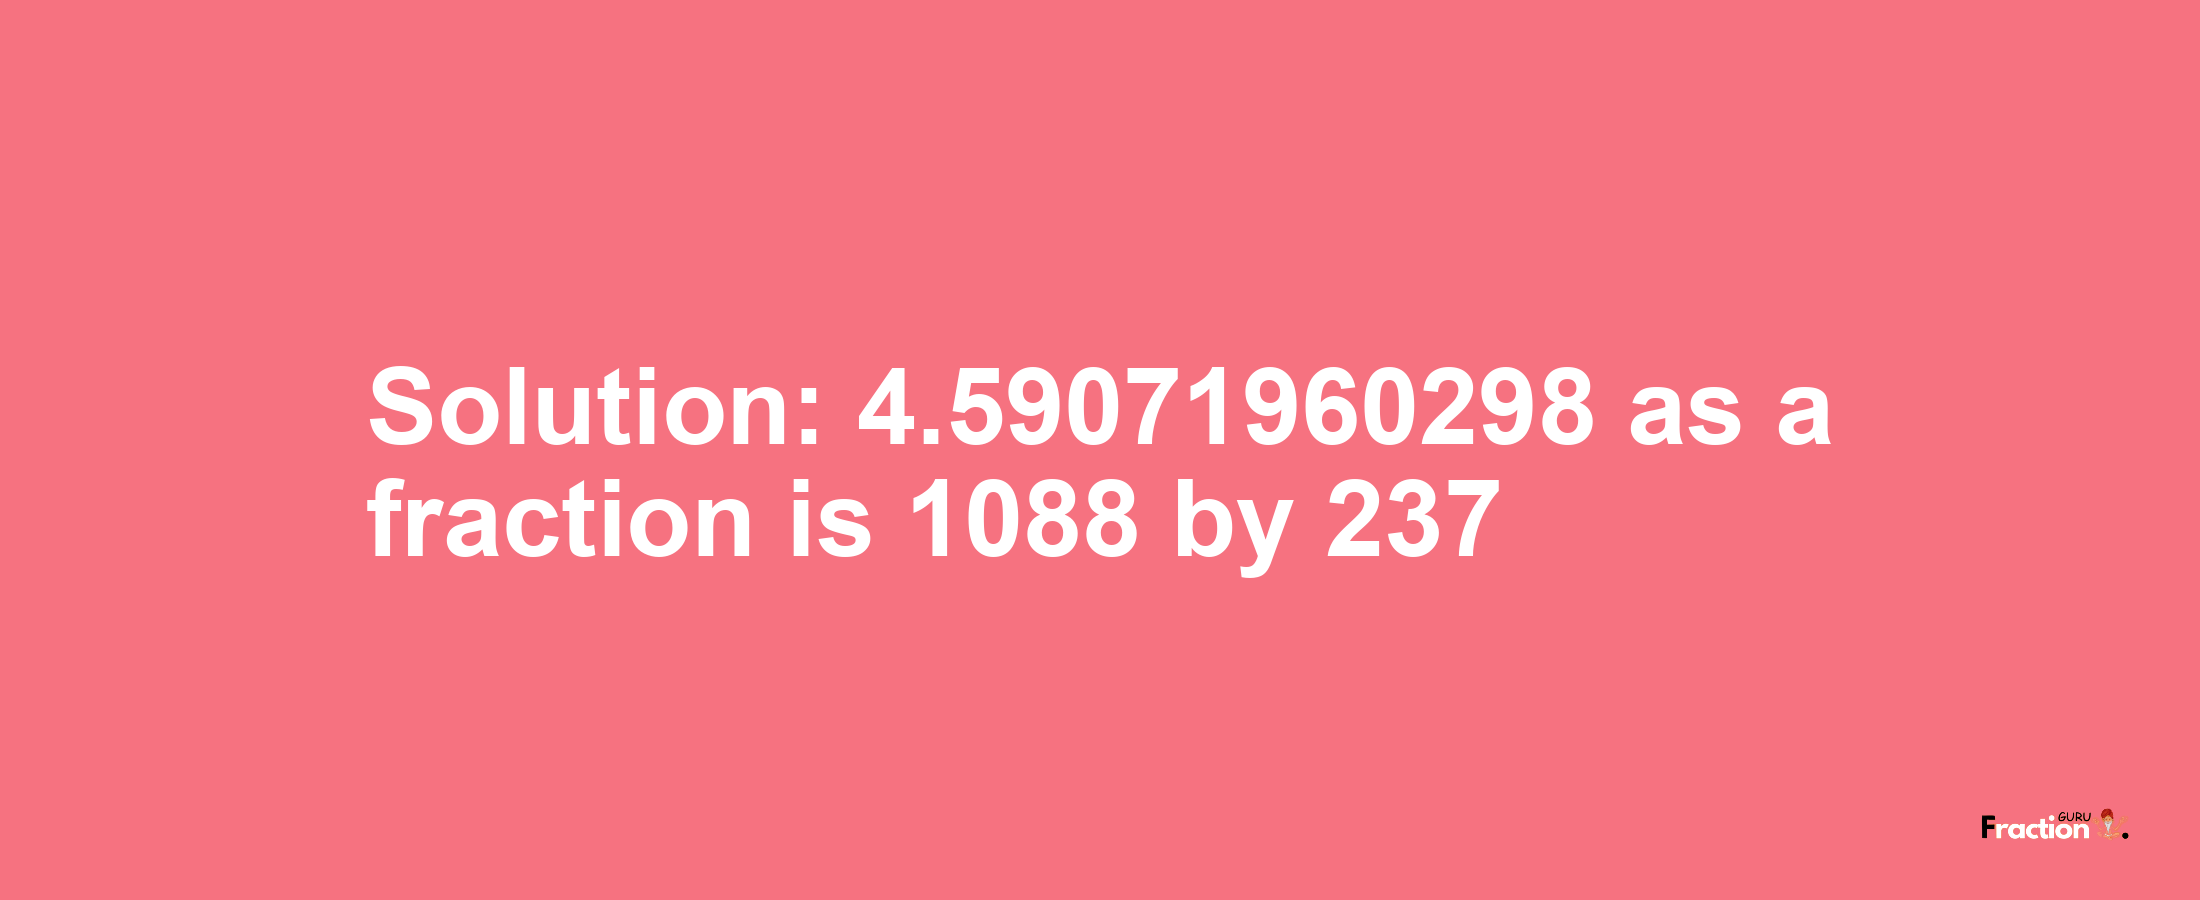 Solution:4.59071960298 as a fraction is 1088/237